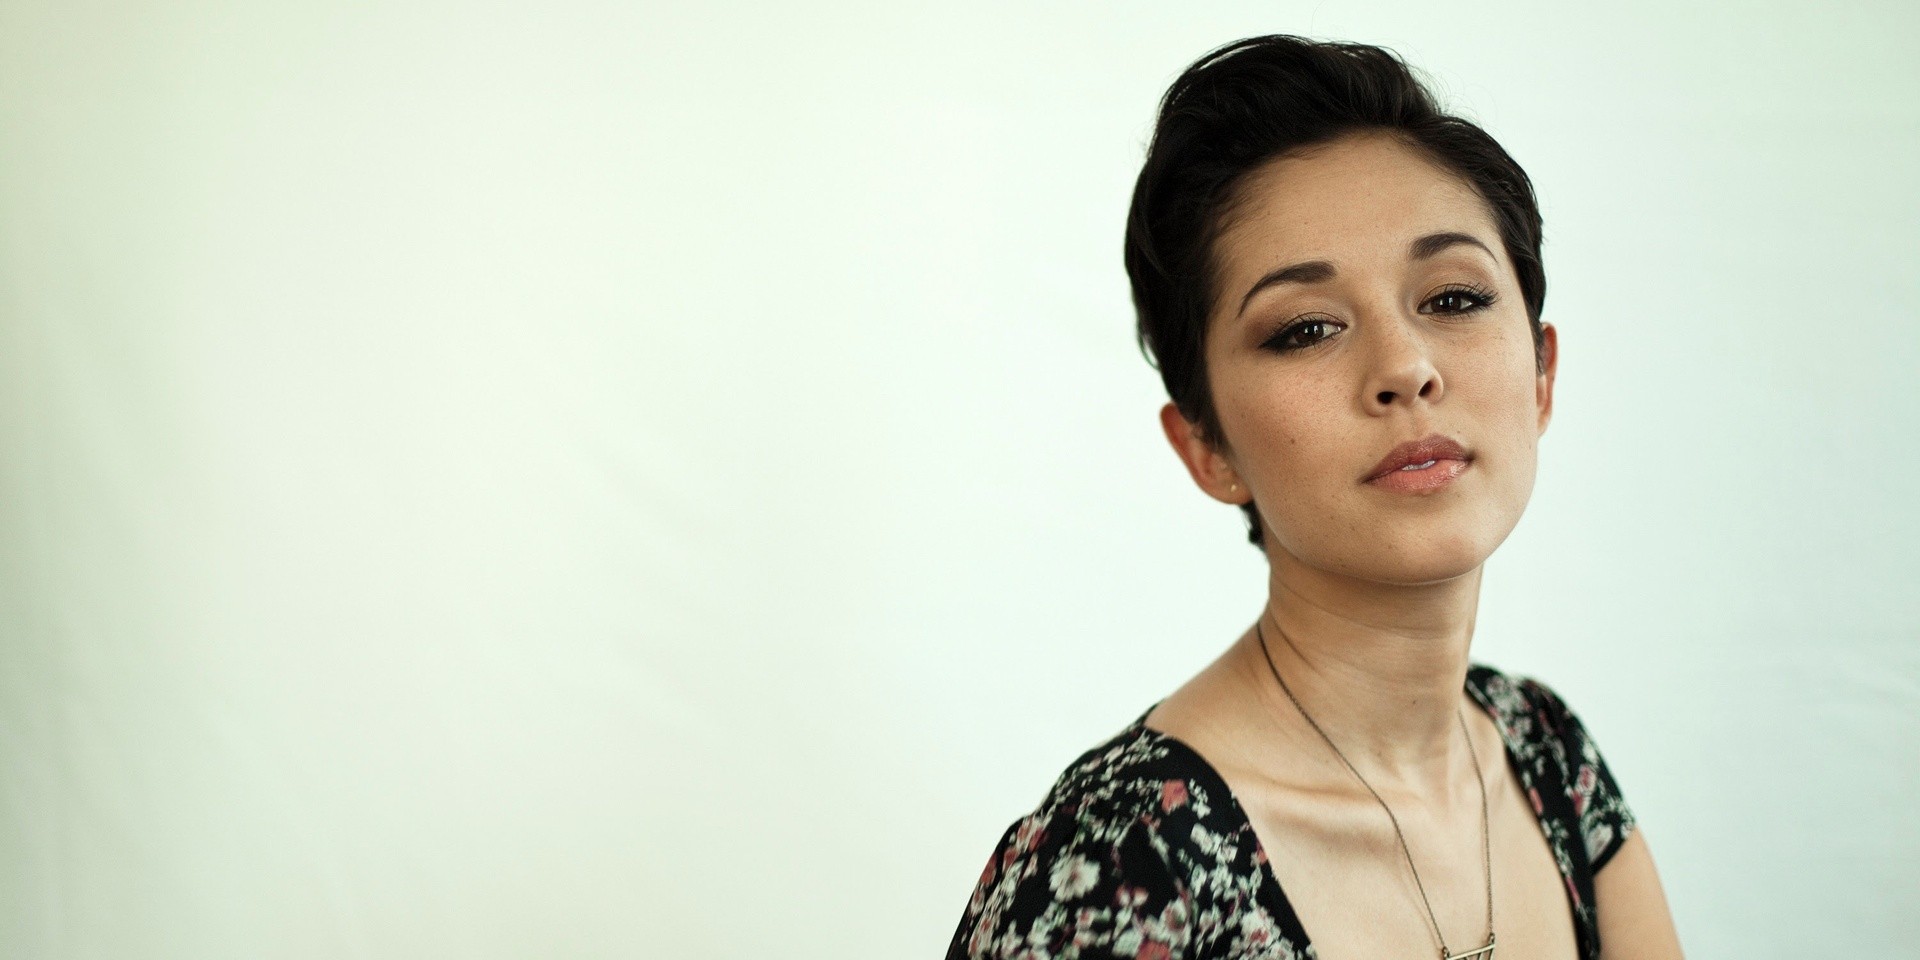 Read Kina Grannis' blog entry about her harrowing experience in Jakarta